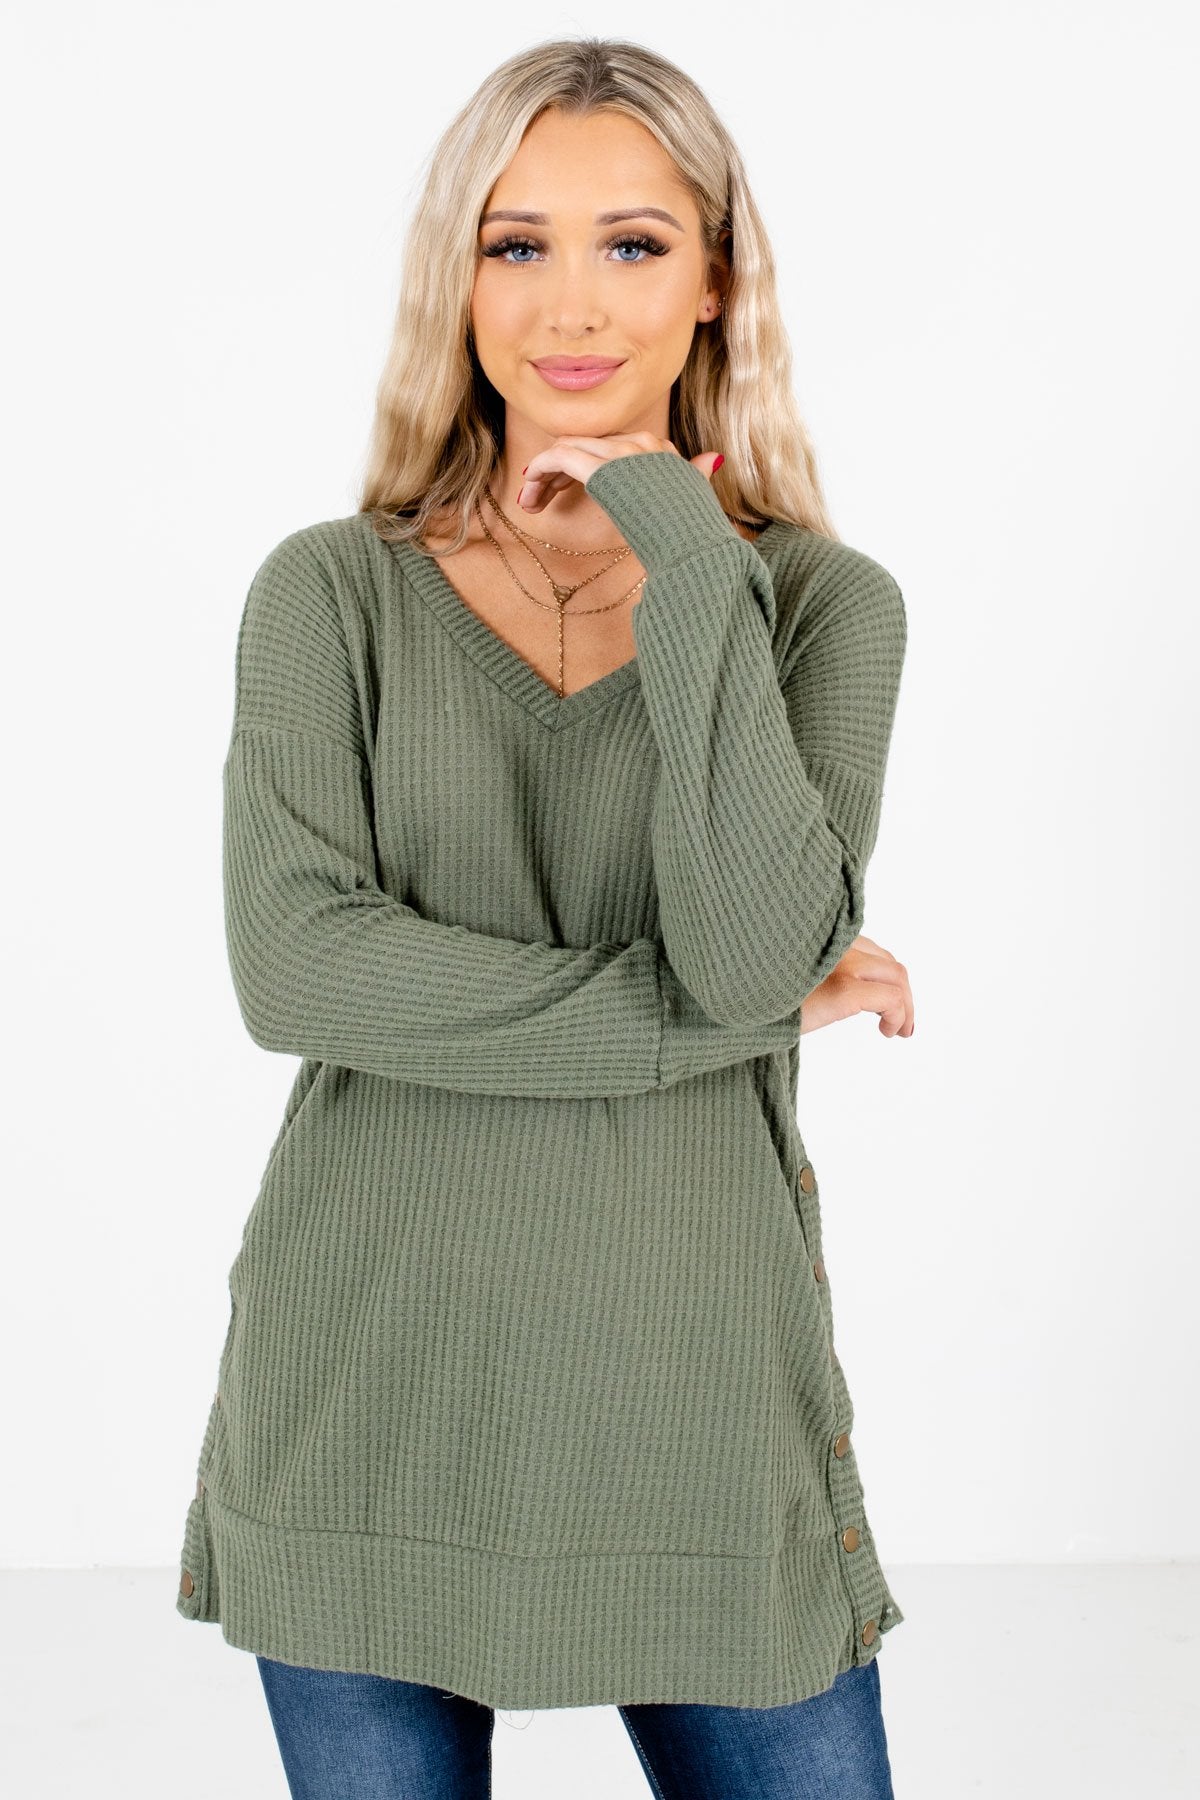 Women’s Olive Green Casual Everyday Boutique Tops